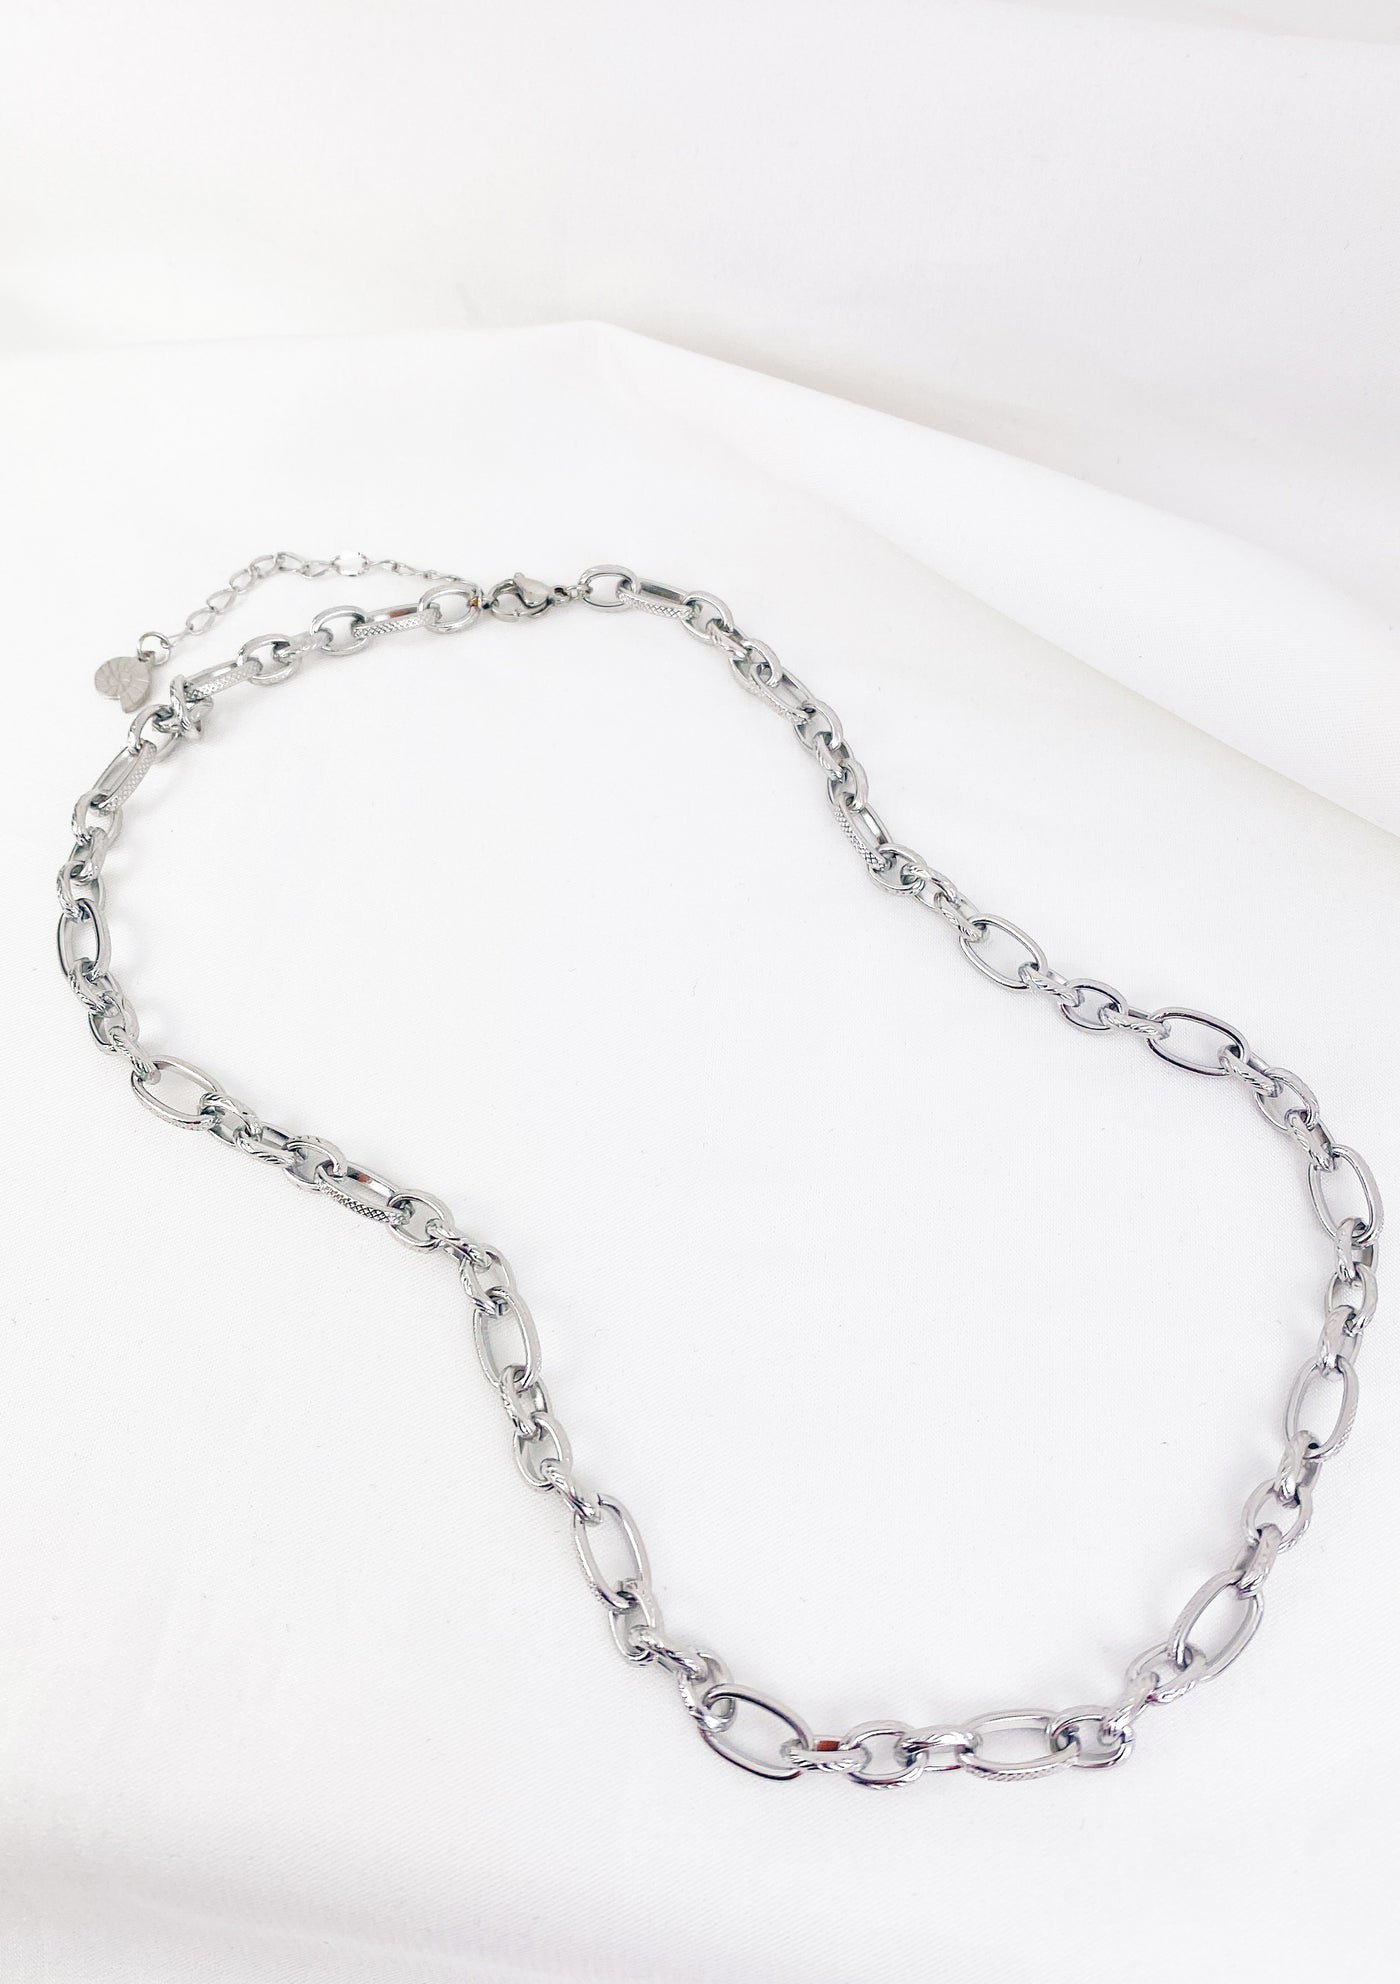 Chunky Oval Figaro Chain Necklace Silver